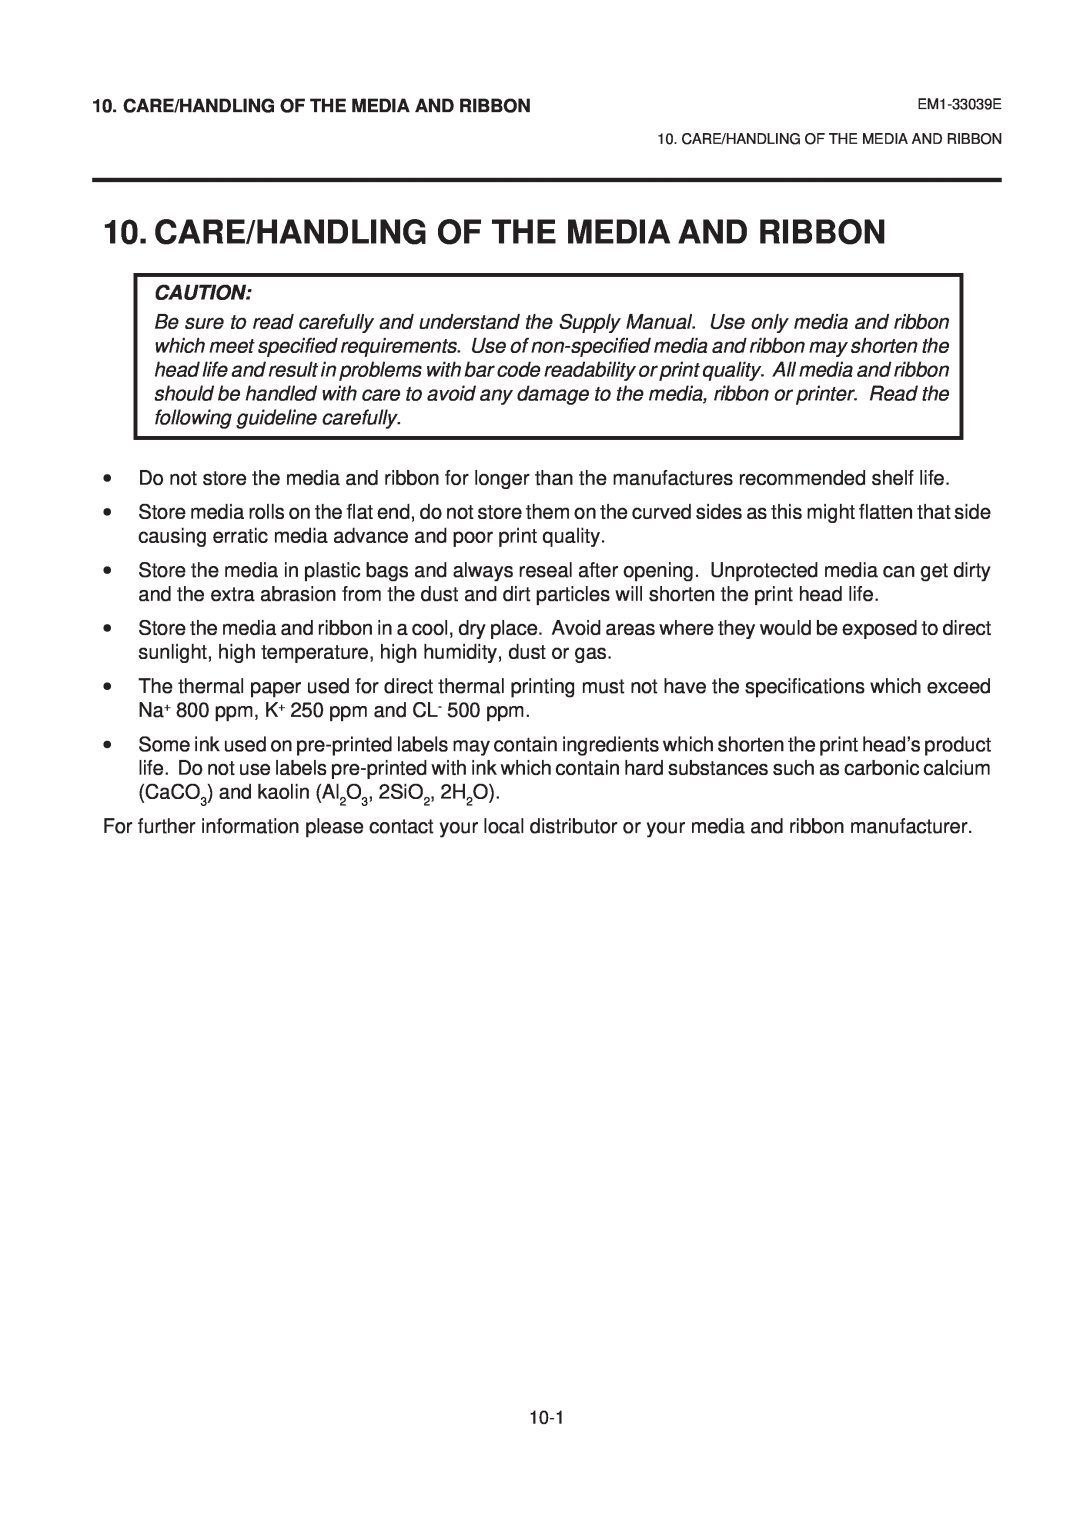 Toshiba EM1-33039EE, B-870 SERIES owner manual Care/Handling Of The Media And Ribbon 